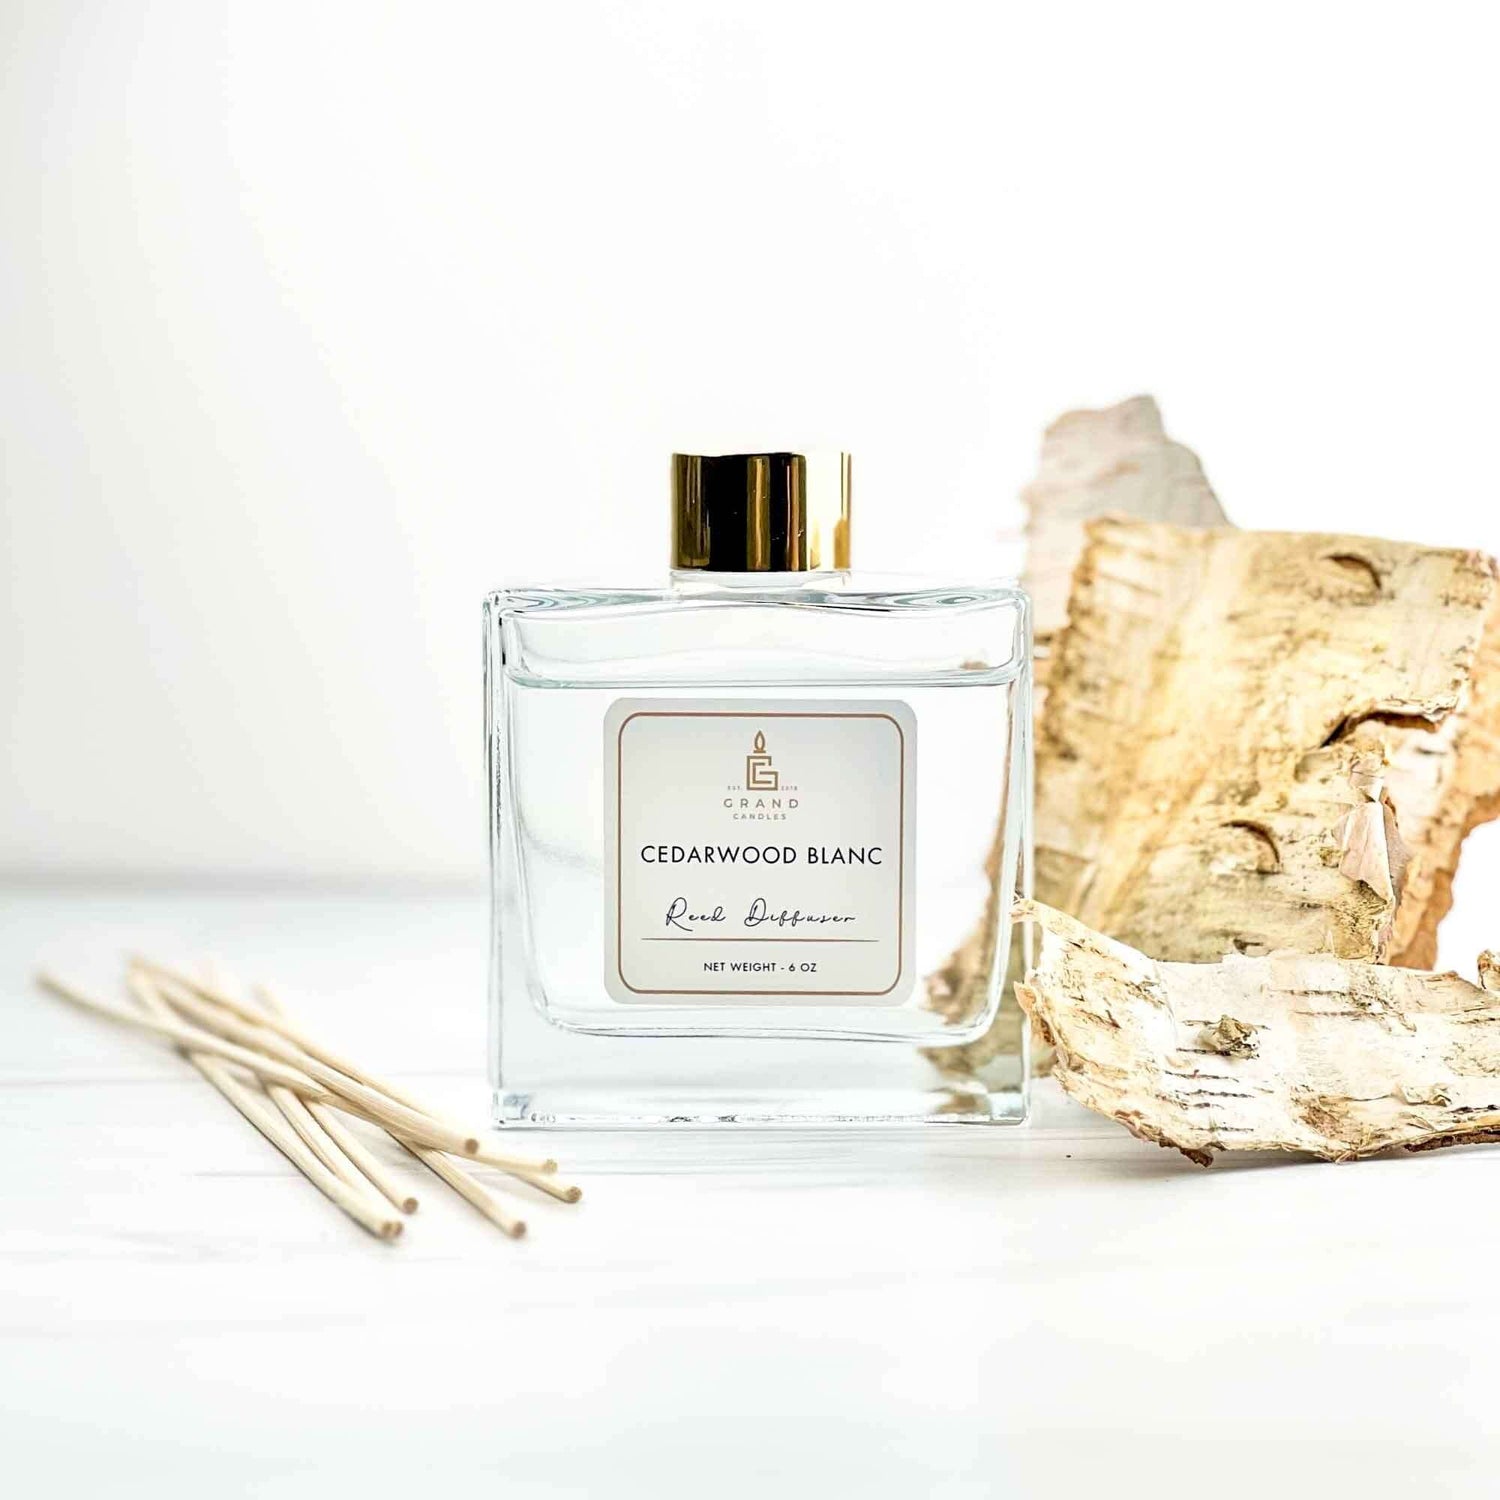 Cedarwood Blanc Reed Diffuser | Refreshing Aroma for Room Decor | Essential Oil and Aromatherapy Diffuser